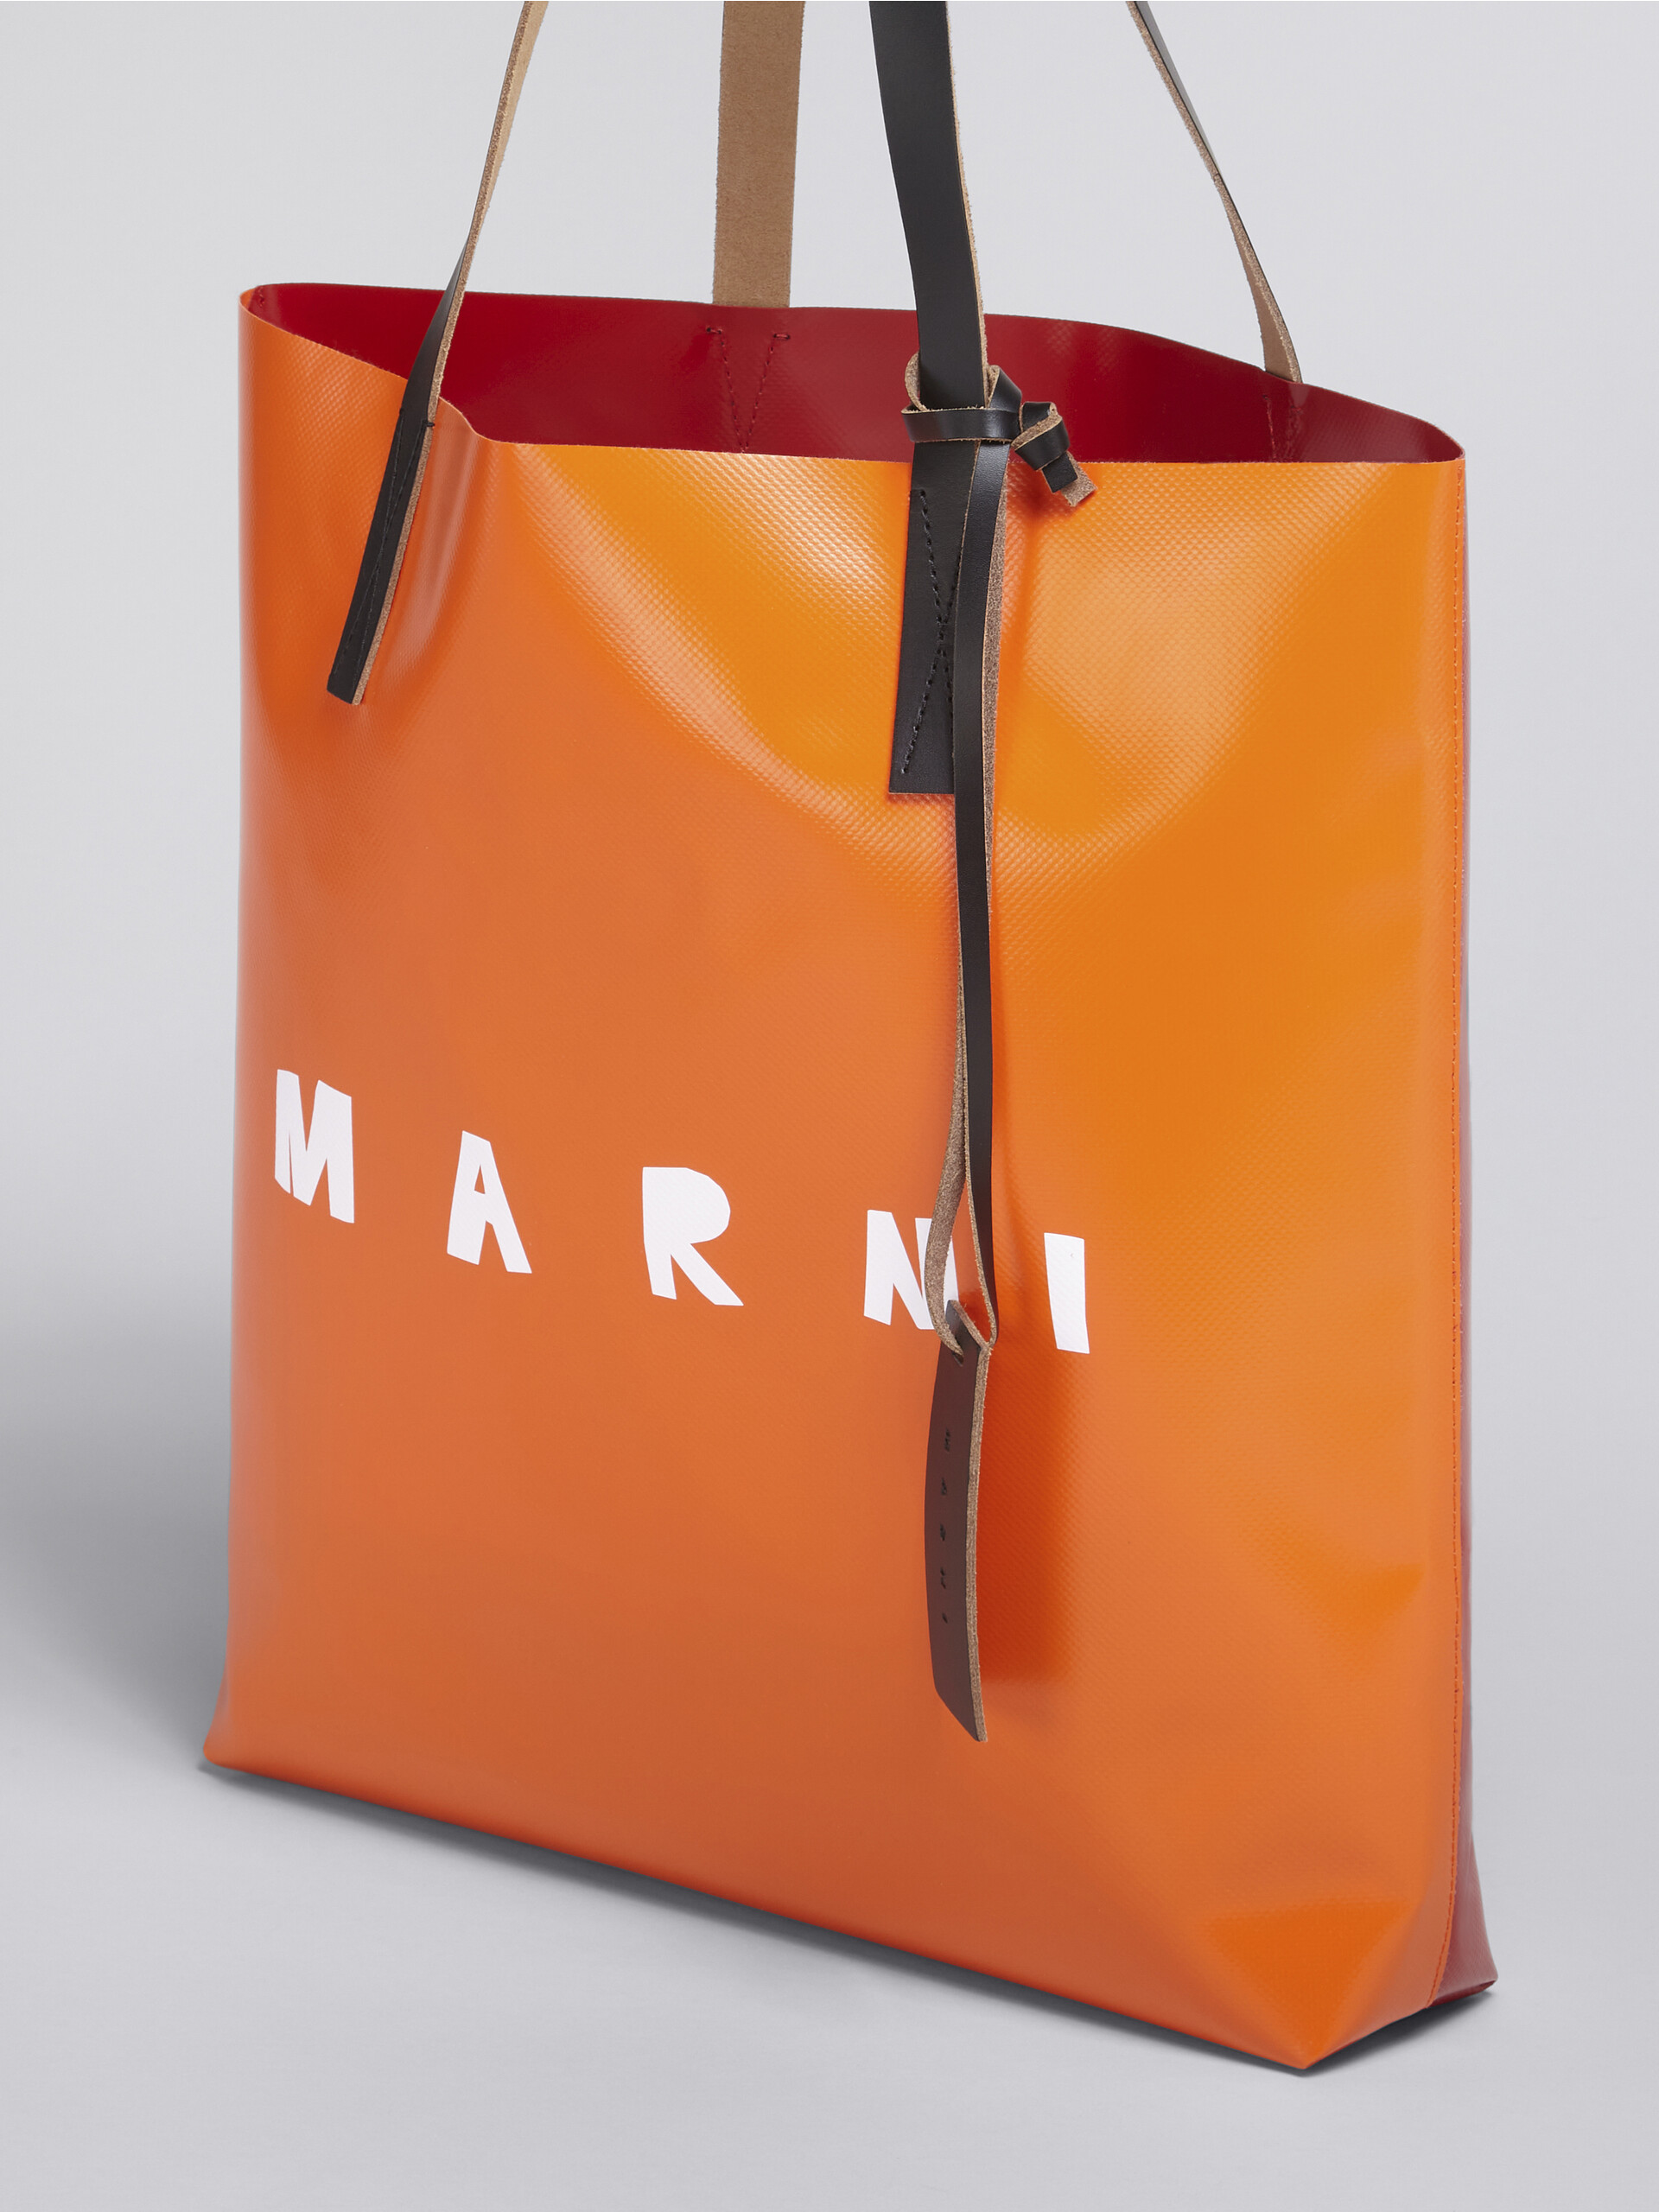 Red and orange TRIBECA shopping bag with Marni logo - Shopping Bags - Image 4